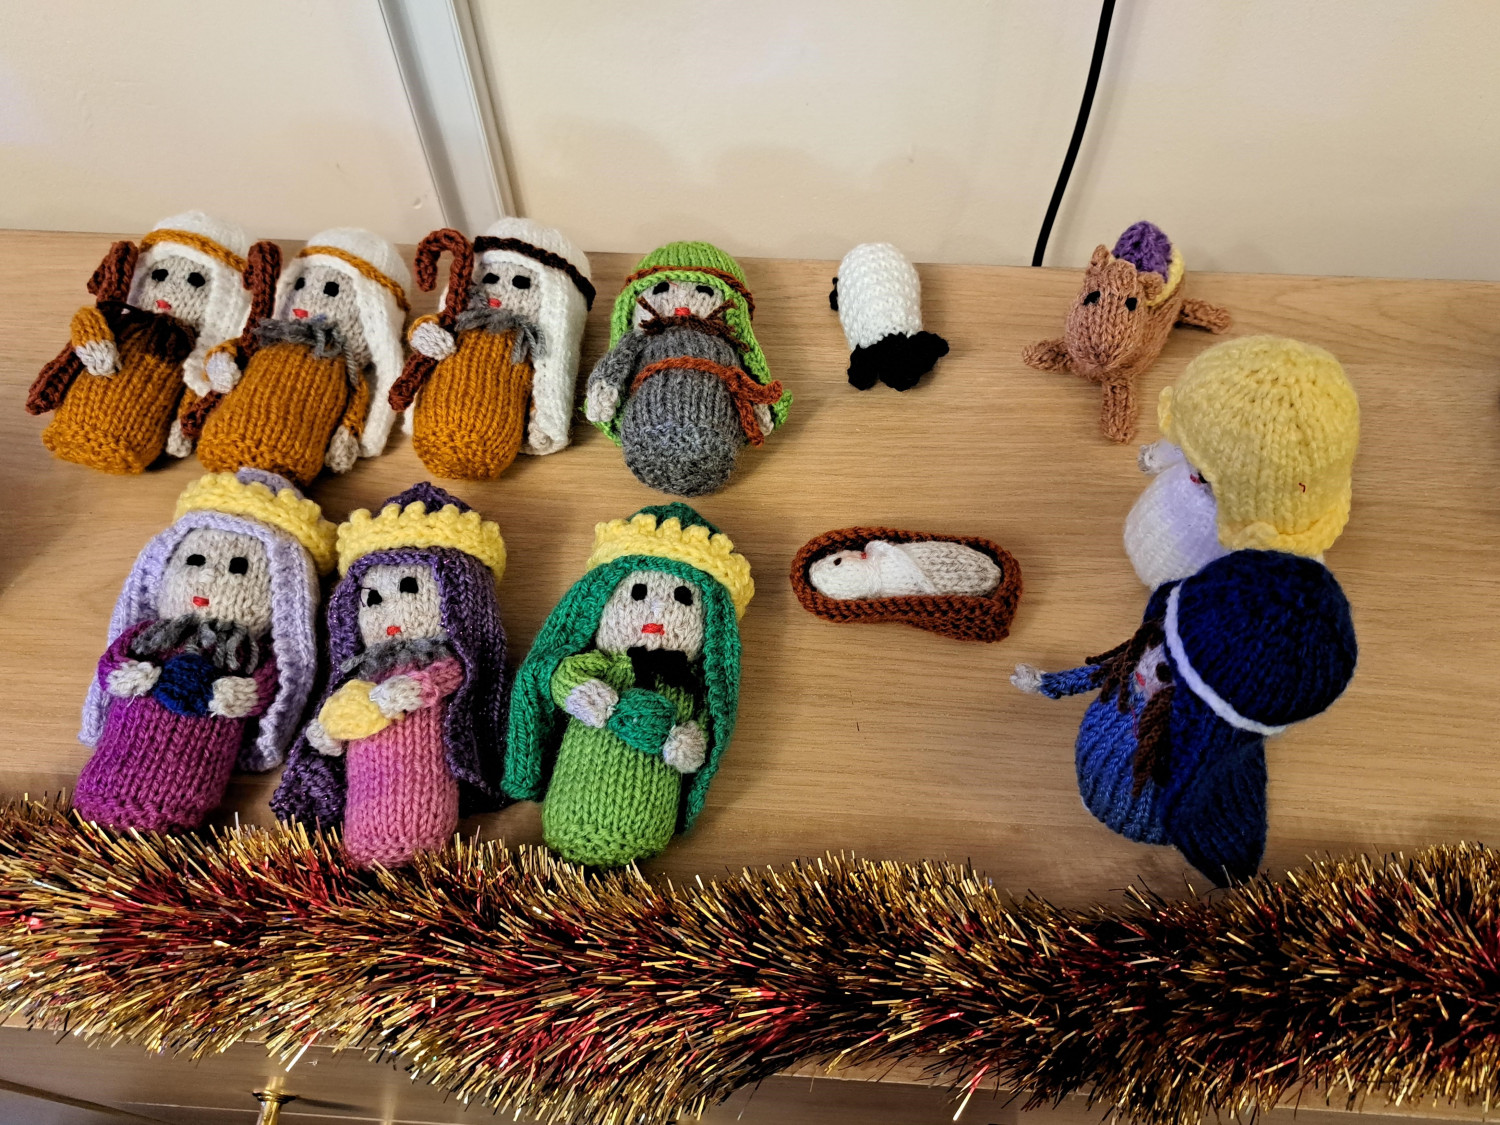 Another knitted nativity